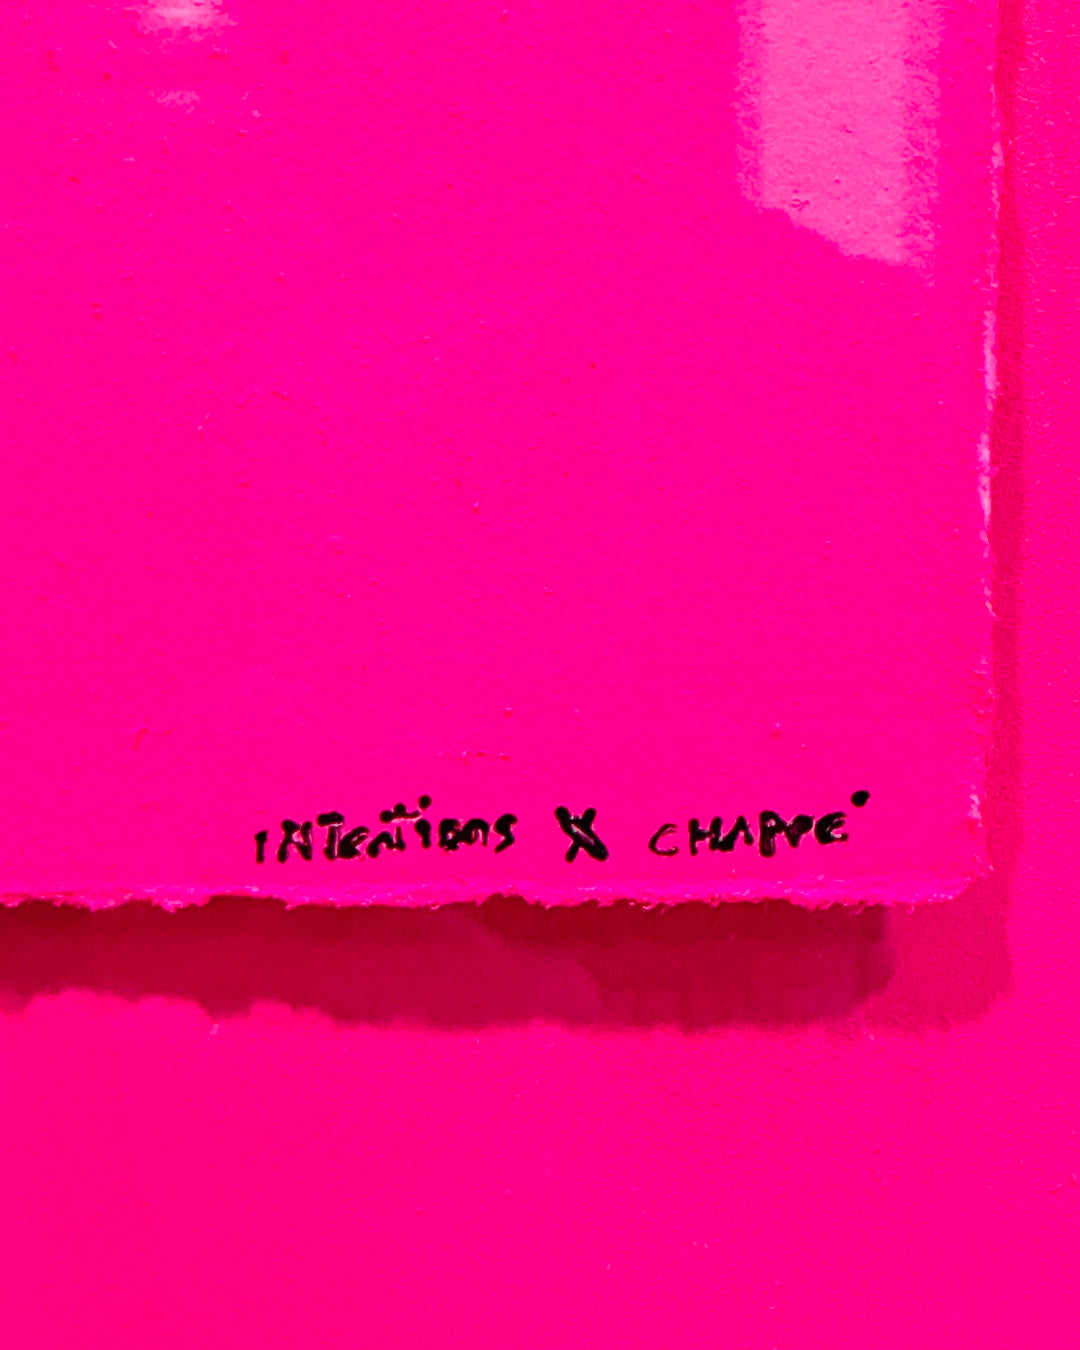 Bear Witness - Intentions x Chappe